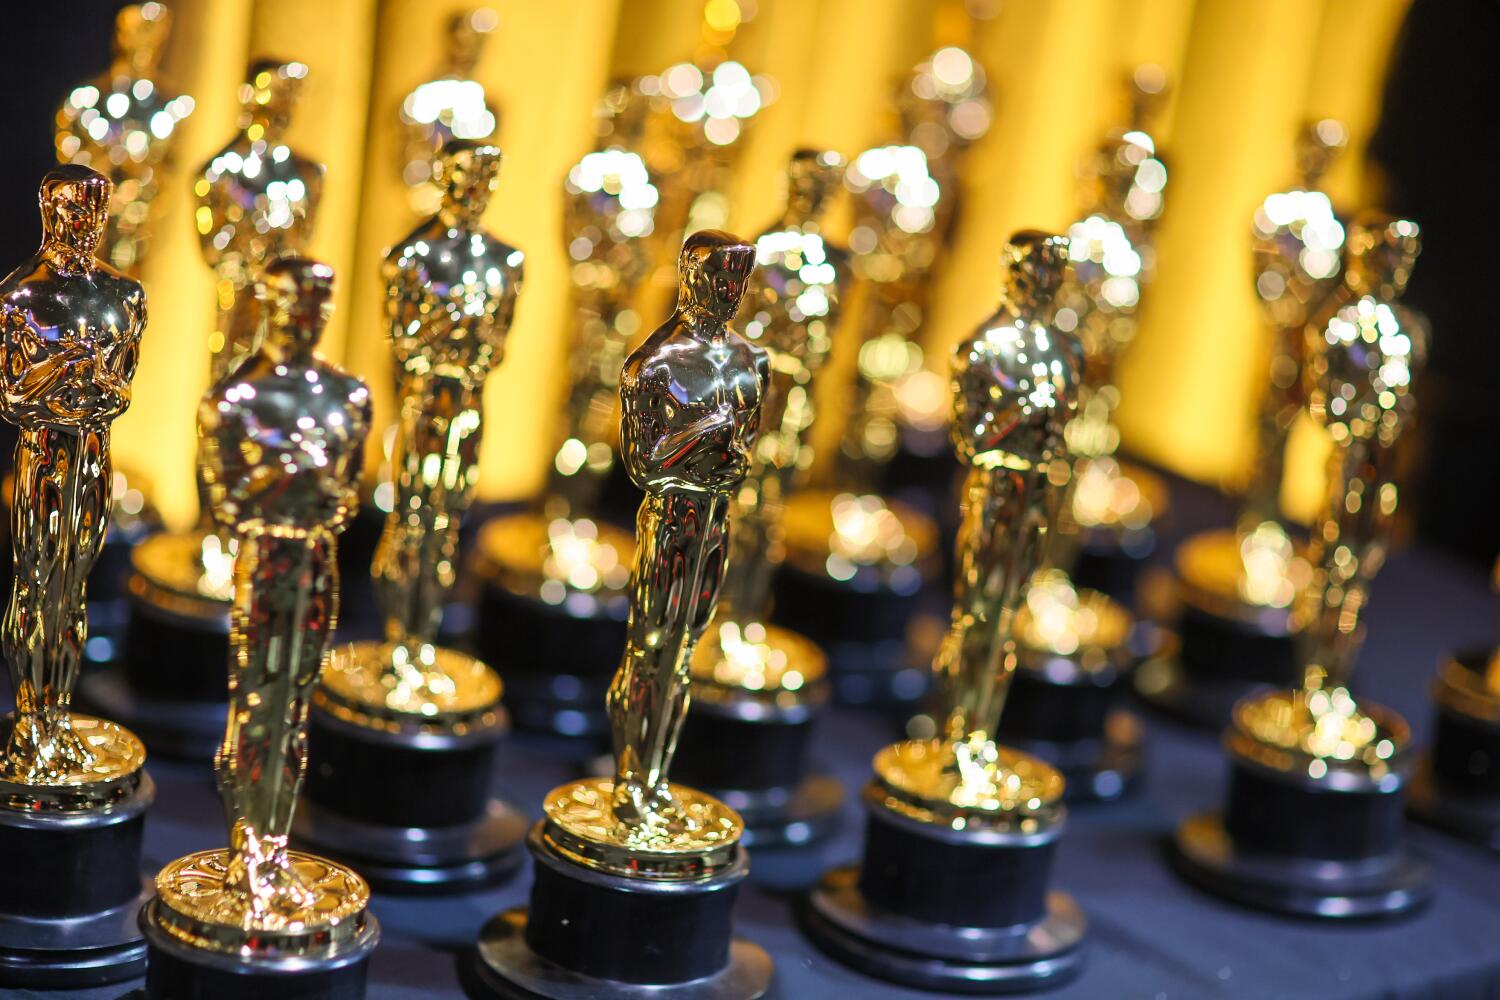 In a push for revenue ahead of the 100th Oscars, academy announces $500-million campaign